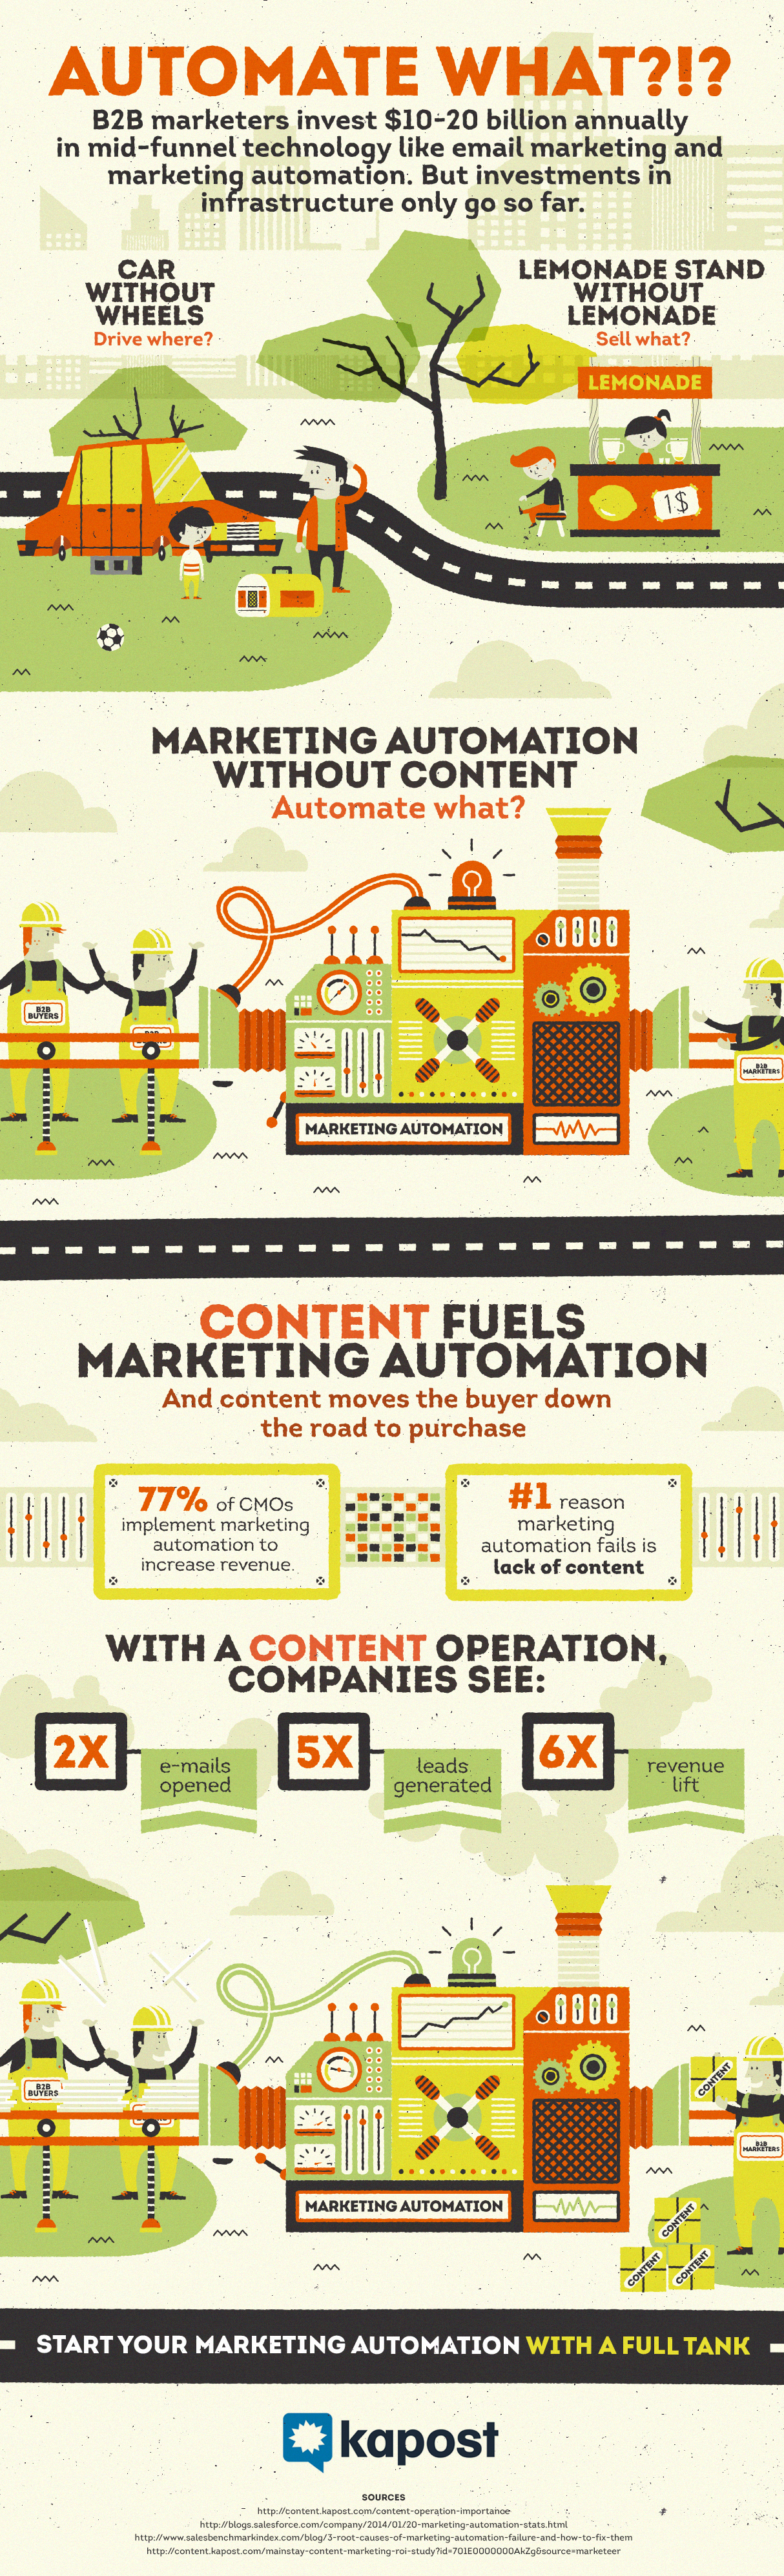 content-and-marketing-automation-infographic.jpg